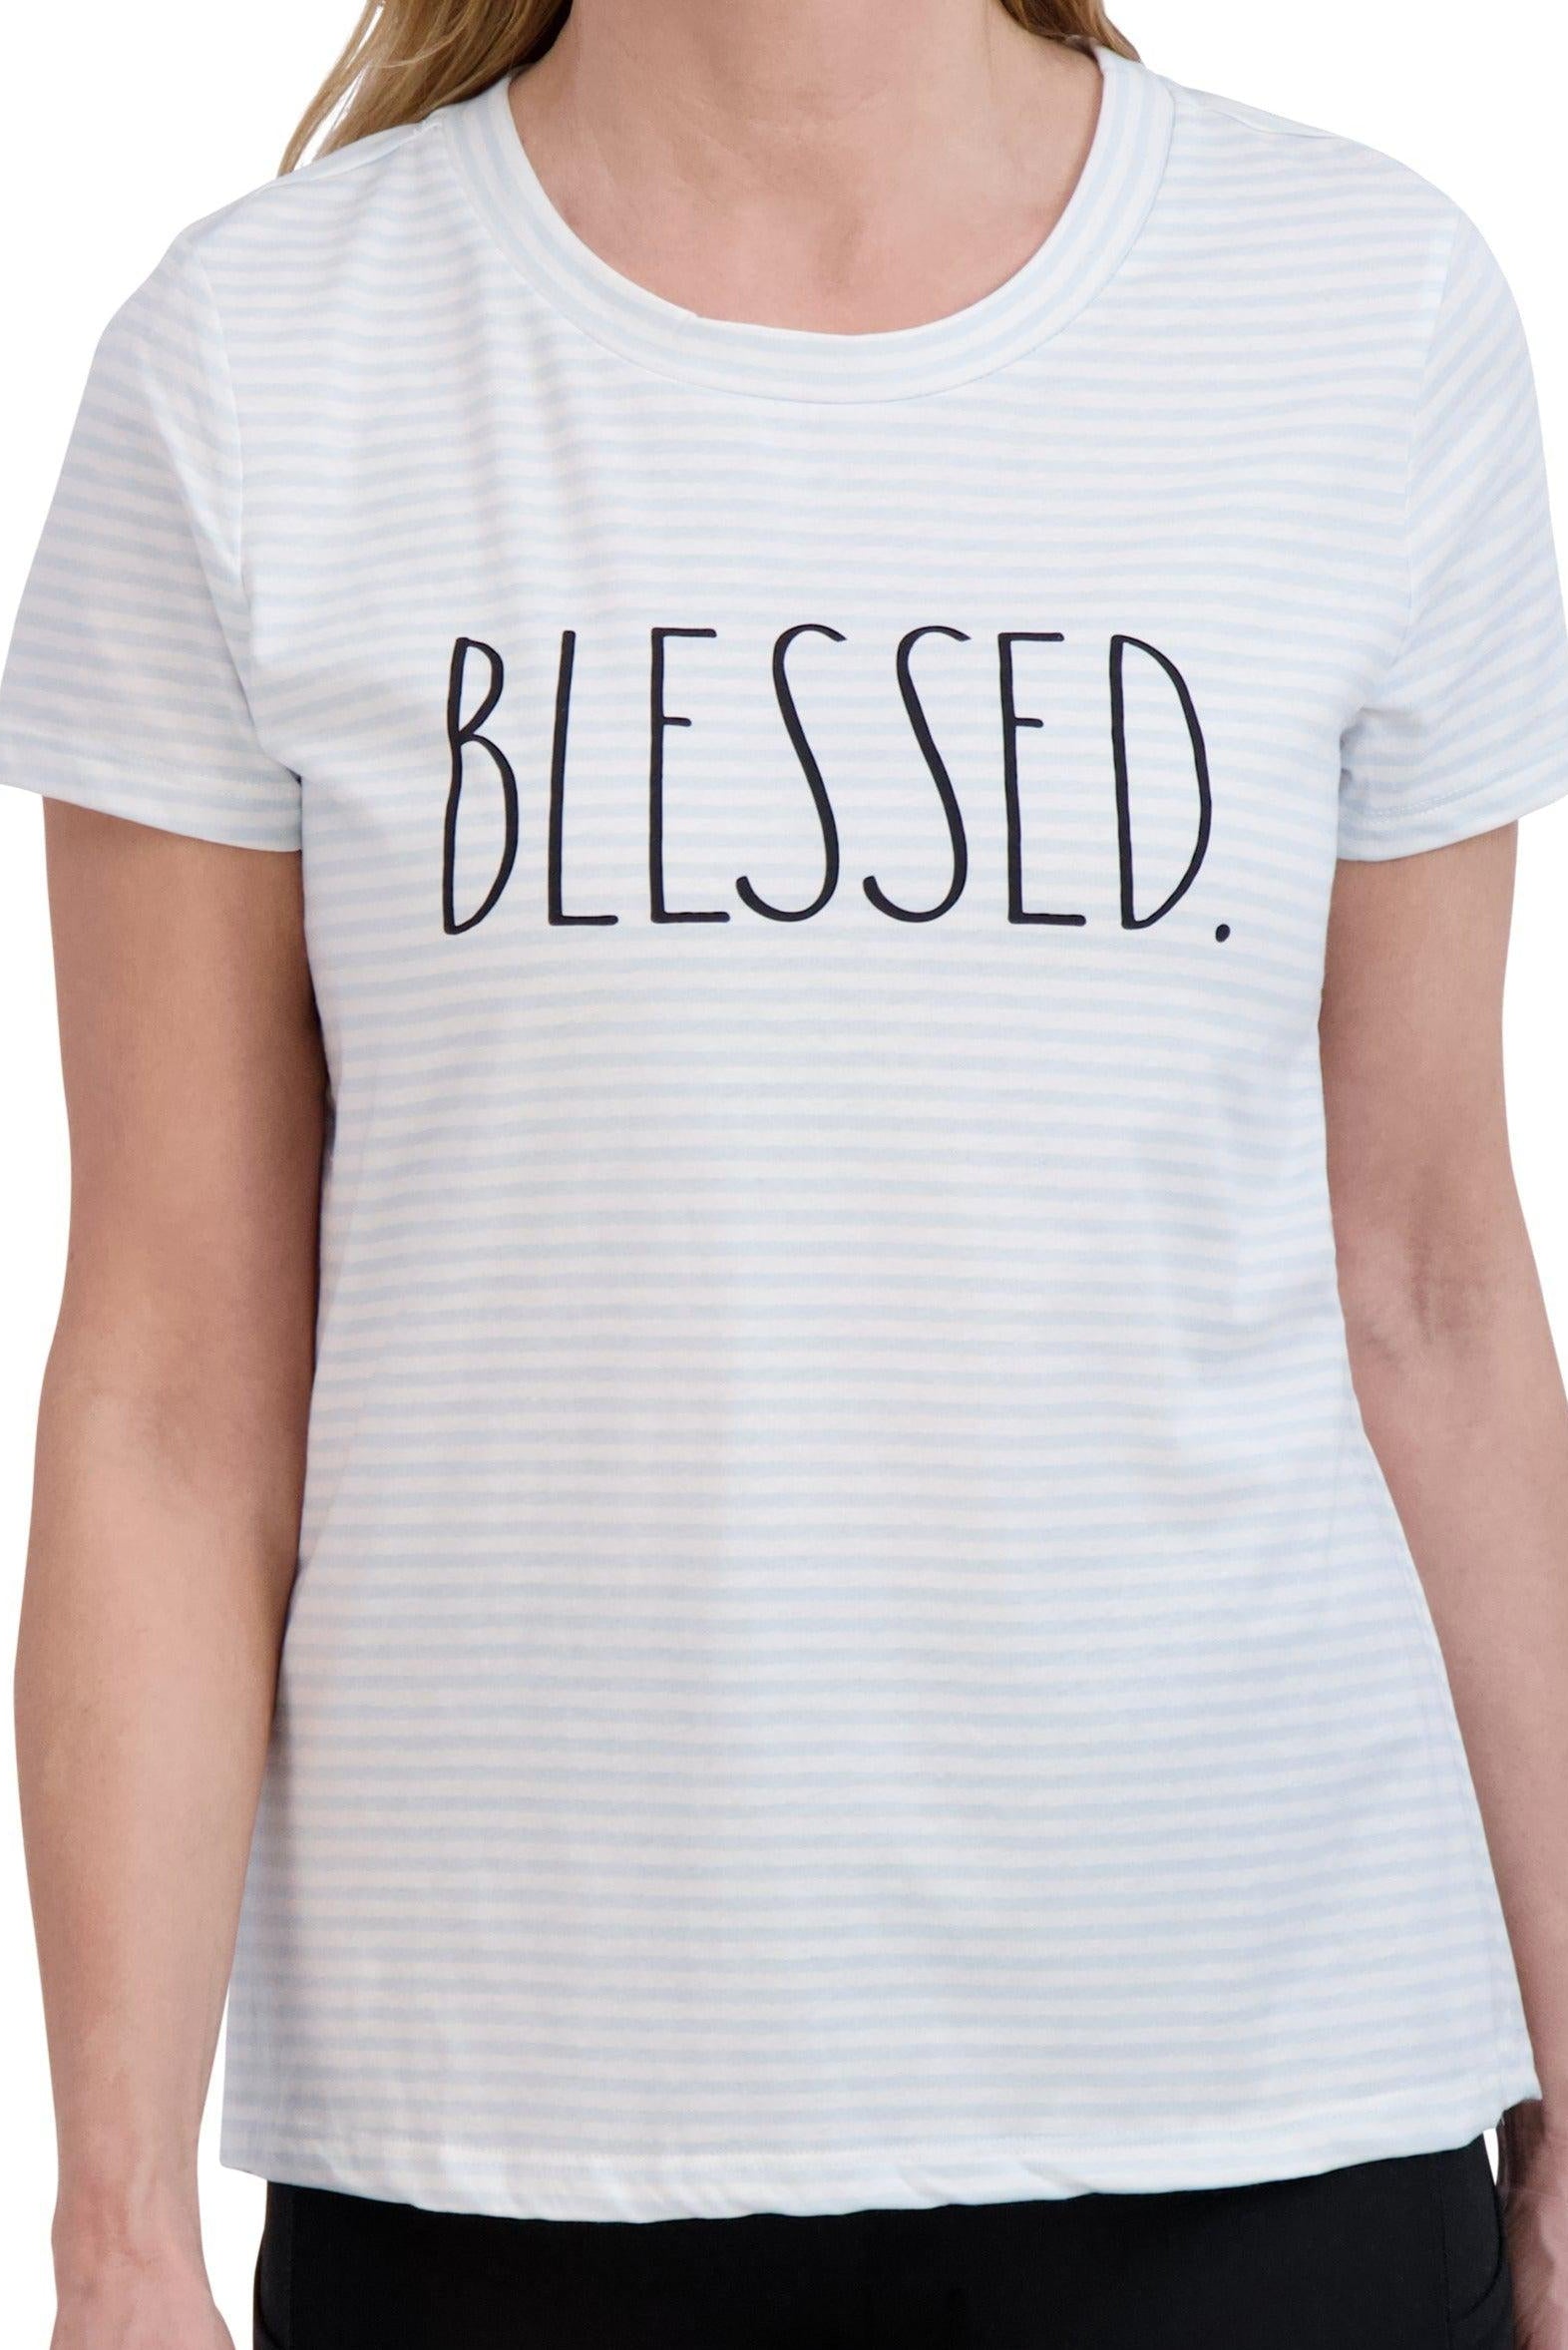 Women's "BLESSED" Short Sleeve Striped Icon T-Shirt - Rae Dunn Wear